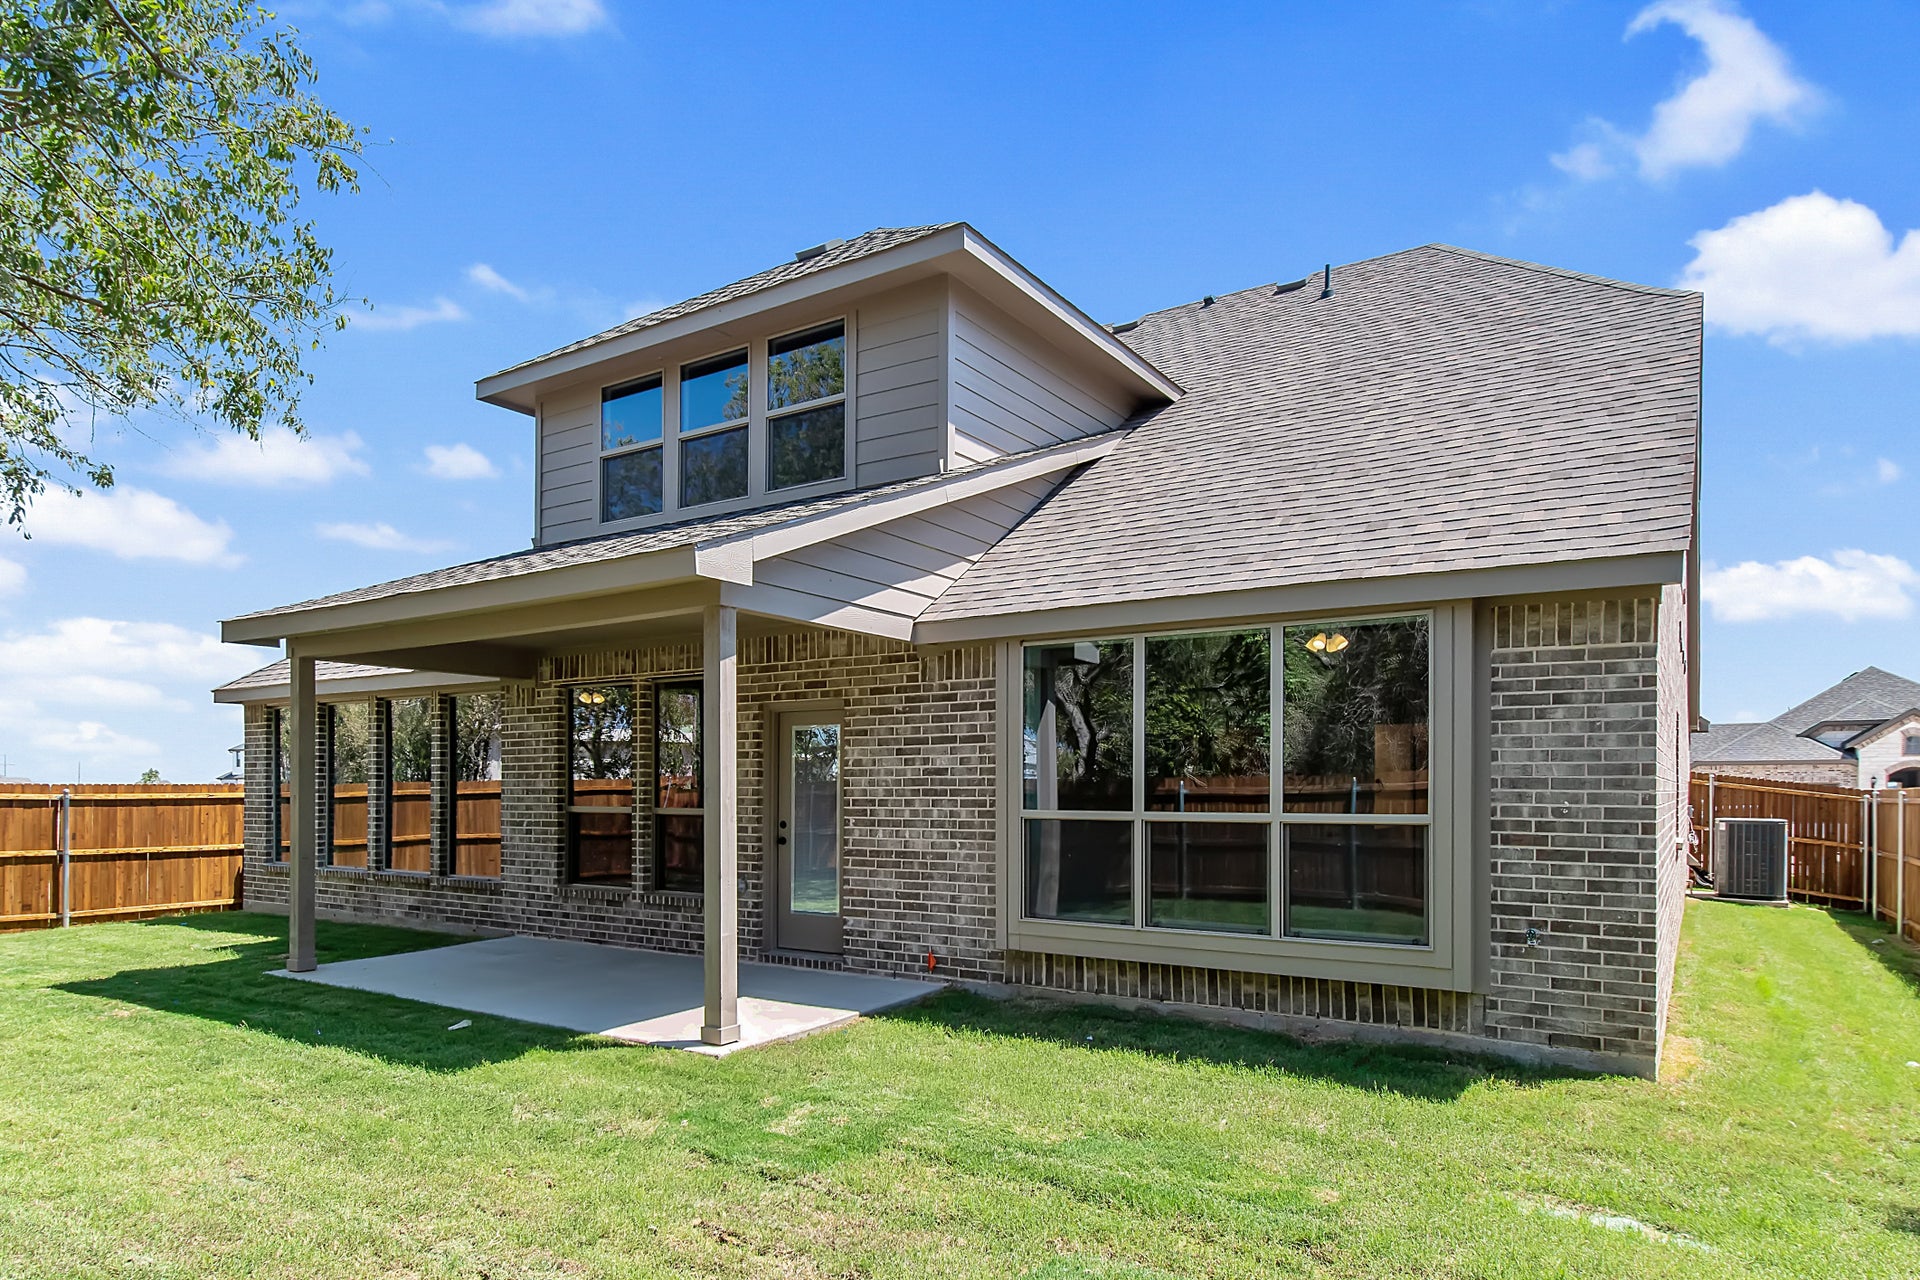 4br New Home in Joshua, TX